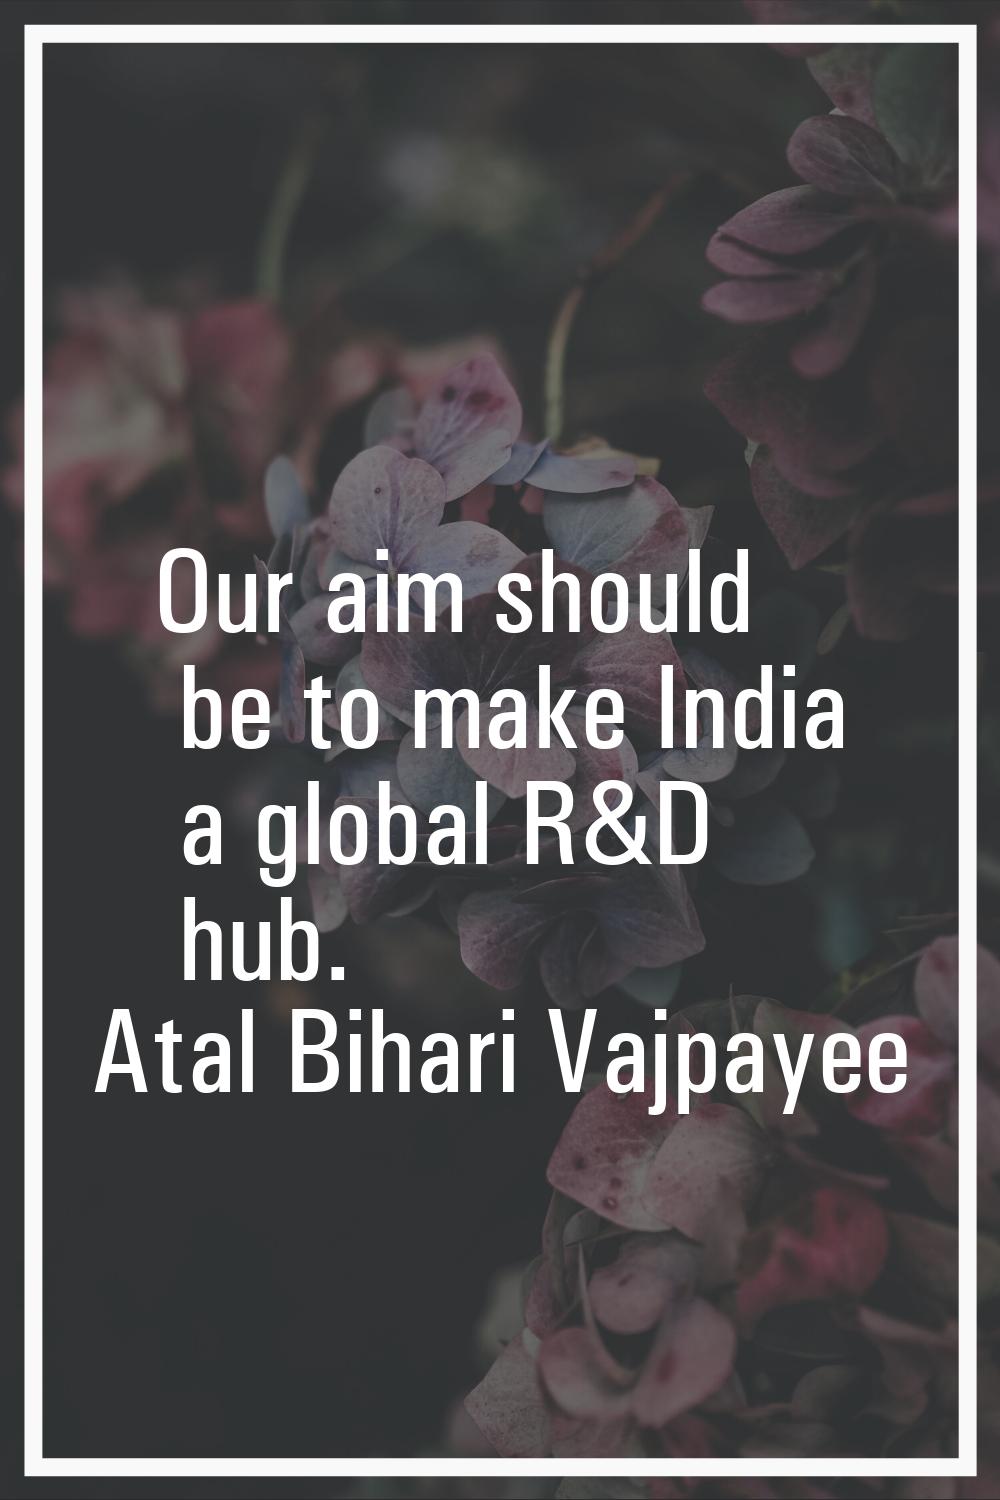 Our aim should be to make India a global R&D hub.